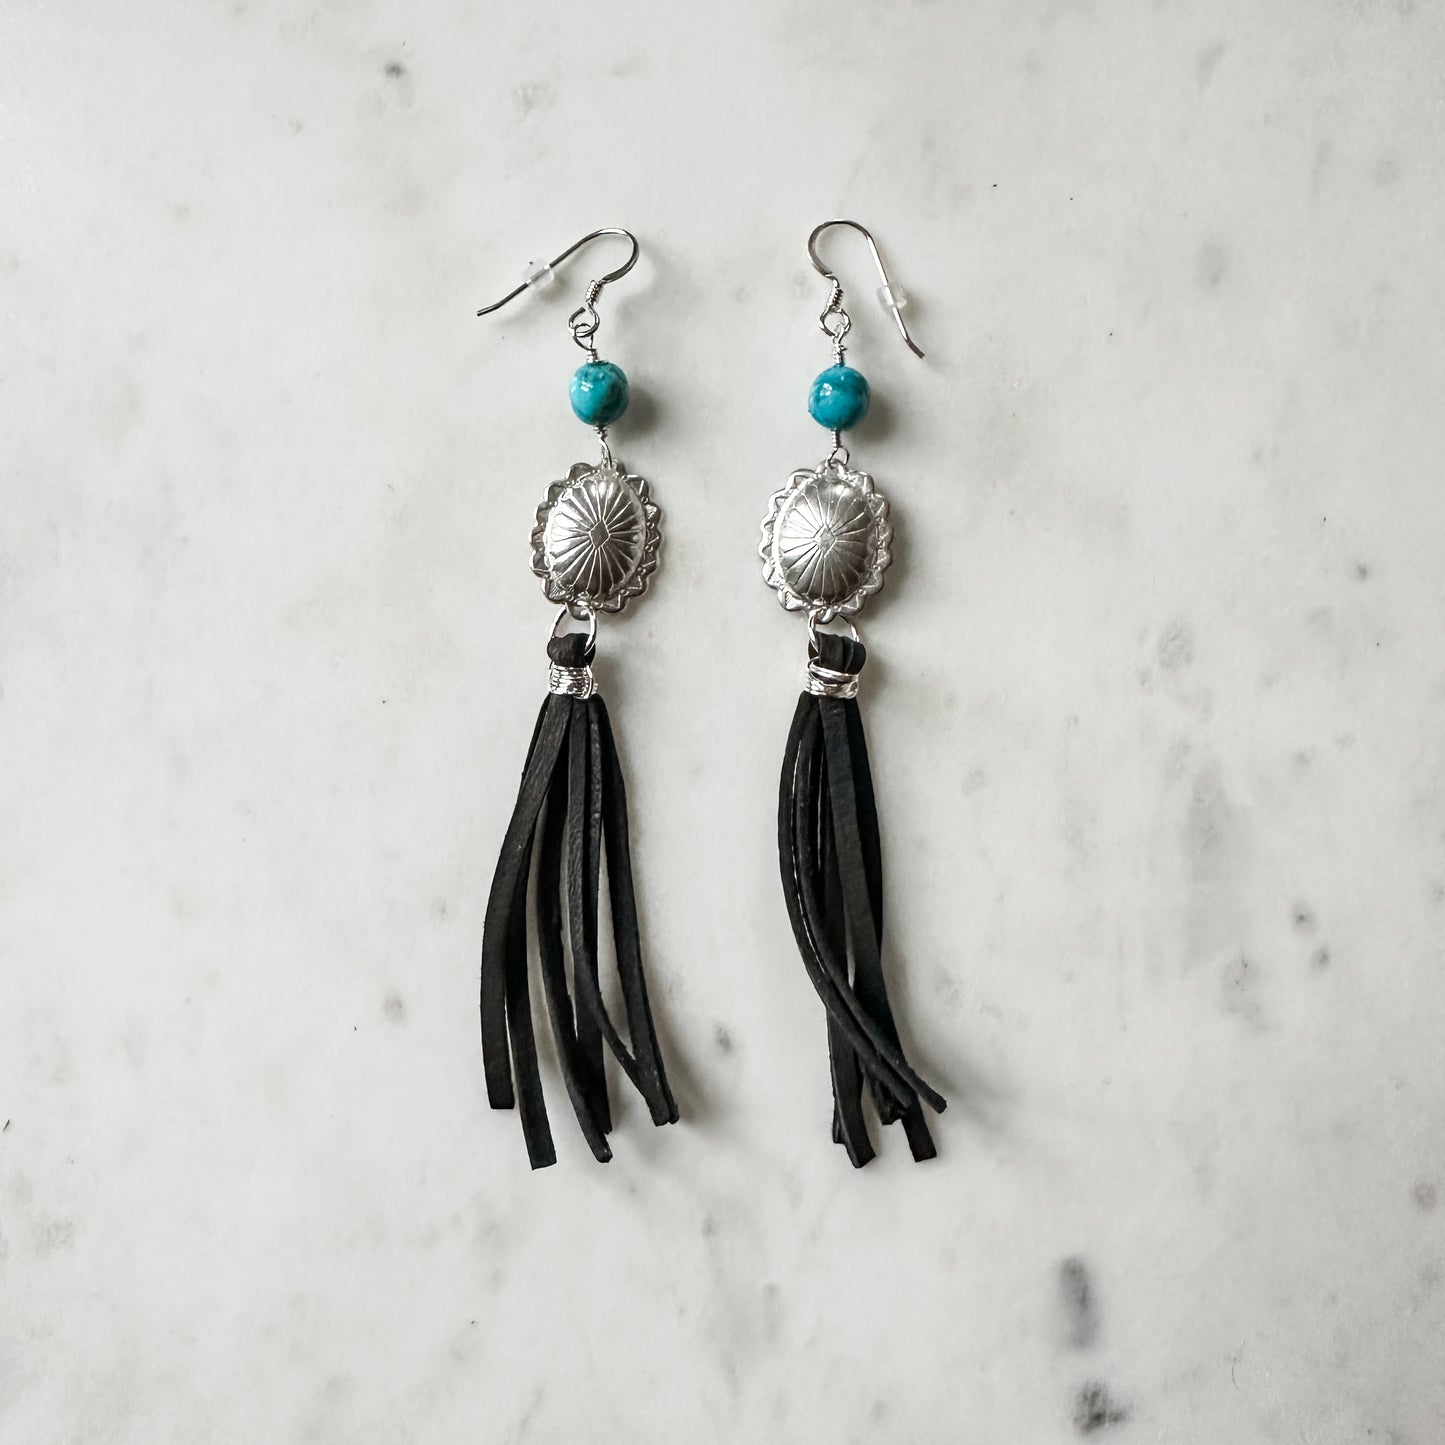 Concho and Turquoise Earrings with Leather Fringe - Quetzal